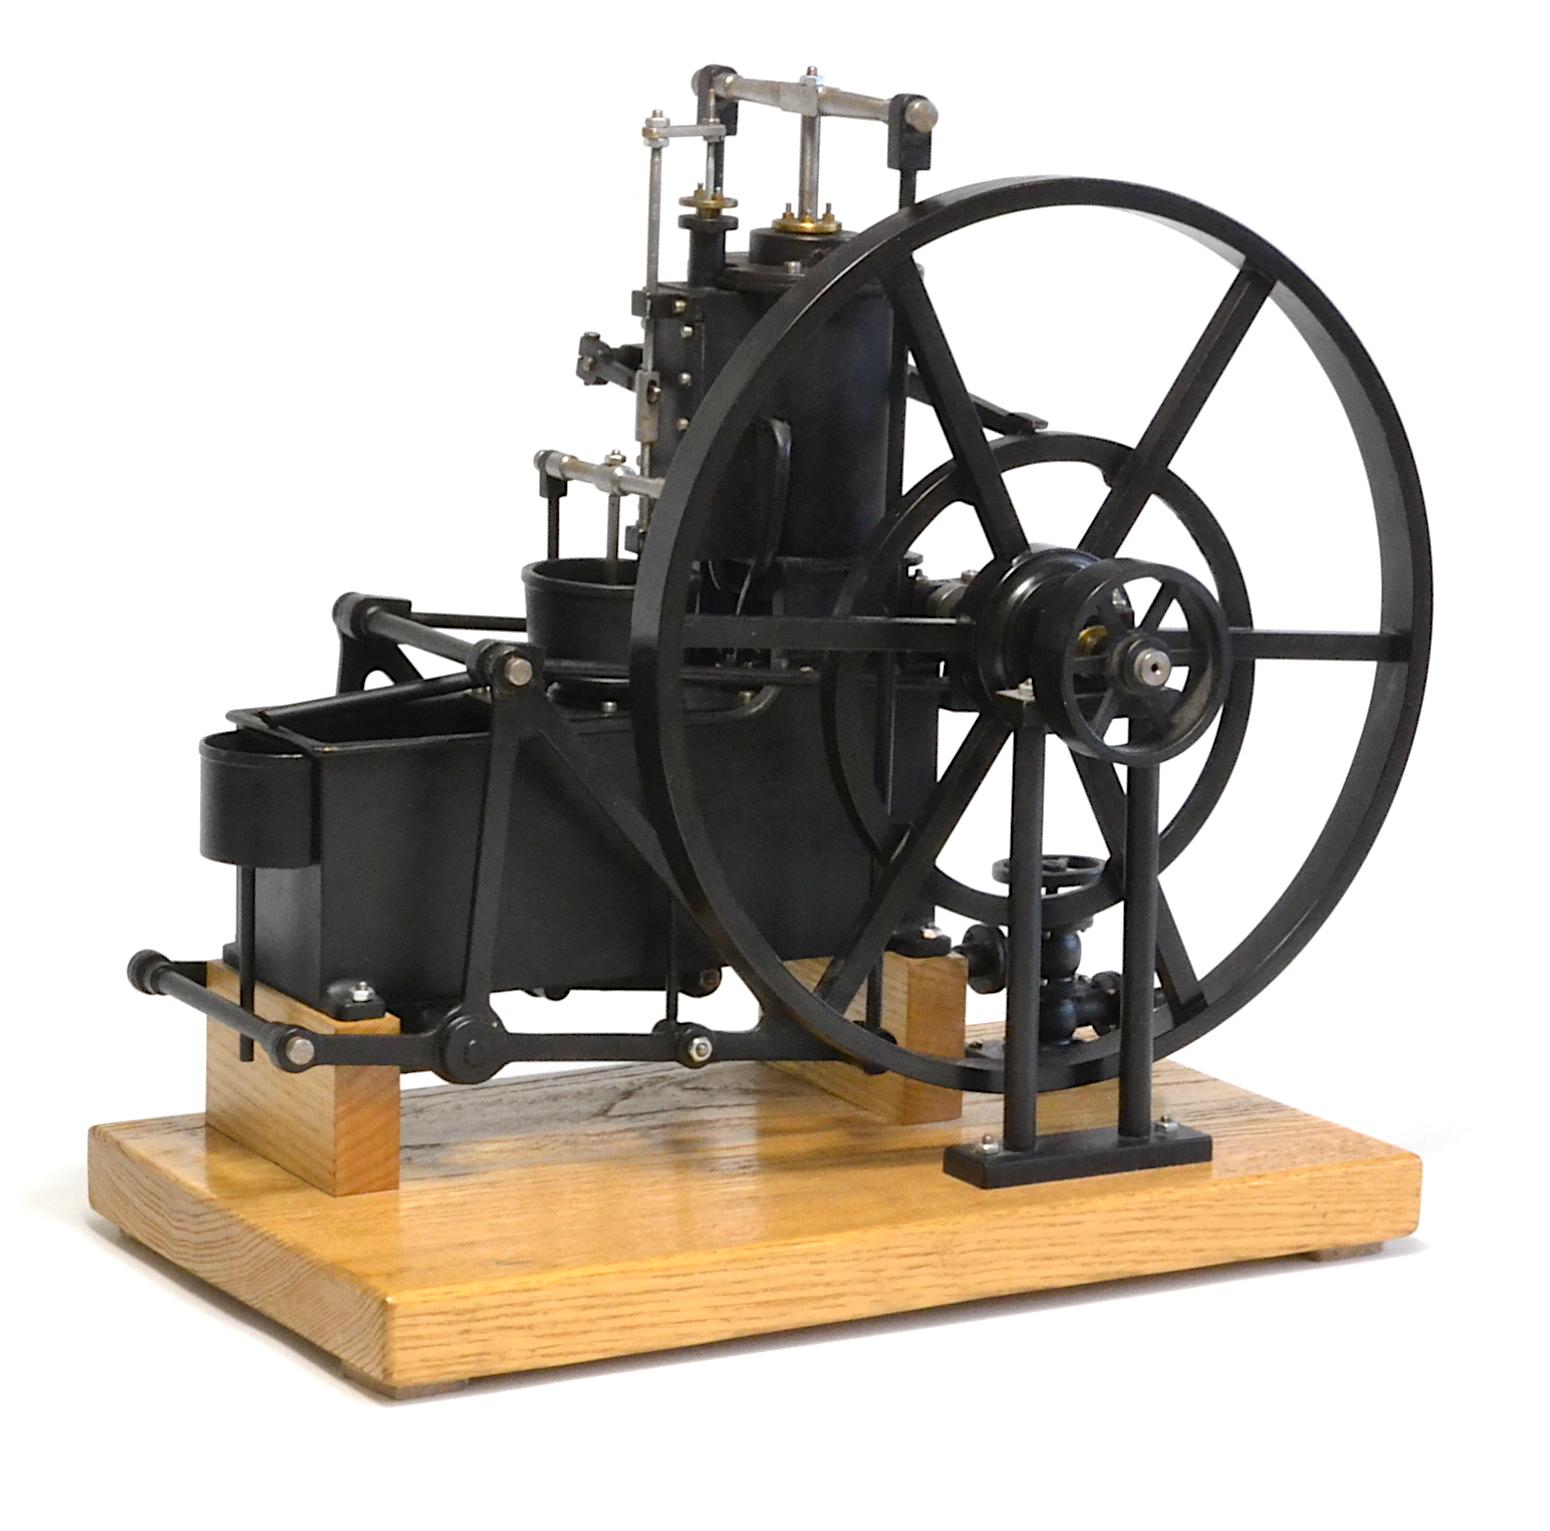 A well engineered model of William Murdoch's Bell Crank engine of 1799. With all the features of the original this is a fine example running smoothly on compressed air and will tick over at close to the designed speed of the original at around